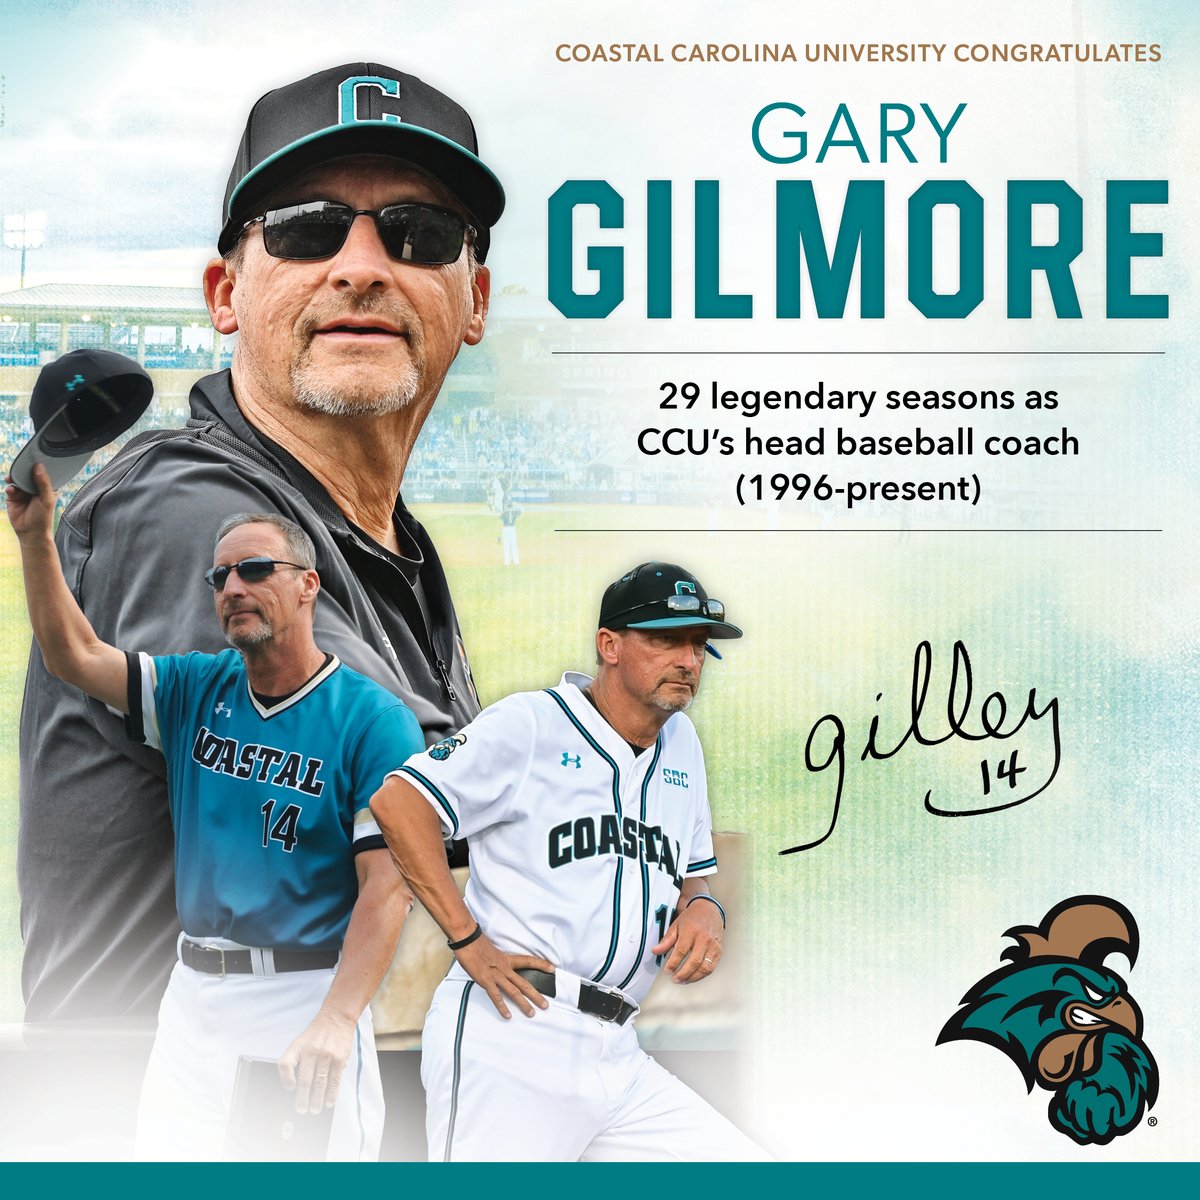 Congratulations to Coach Gary Gilmore for 29 legendary seasons as #CCU's head baseball coach! Make sure to join us for a special recognition at today's game!